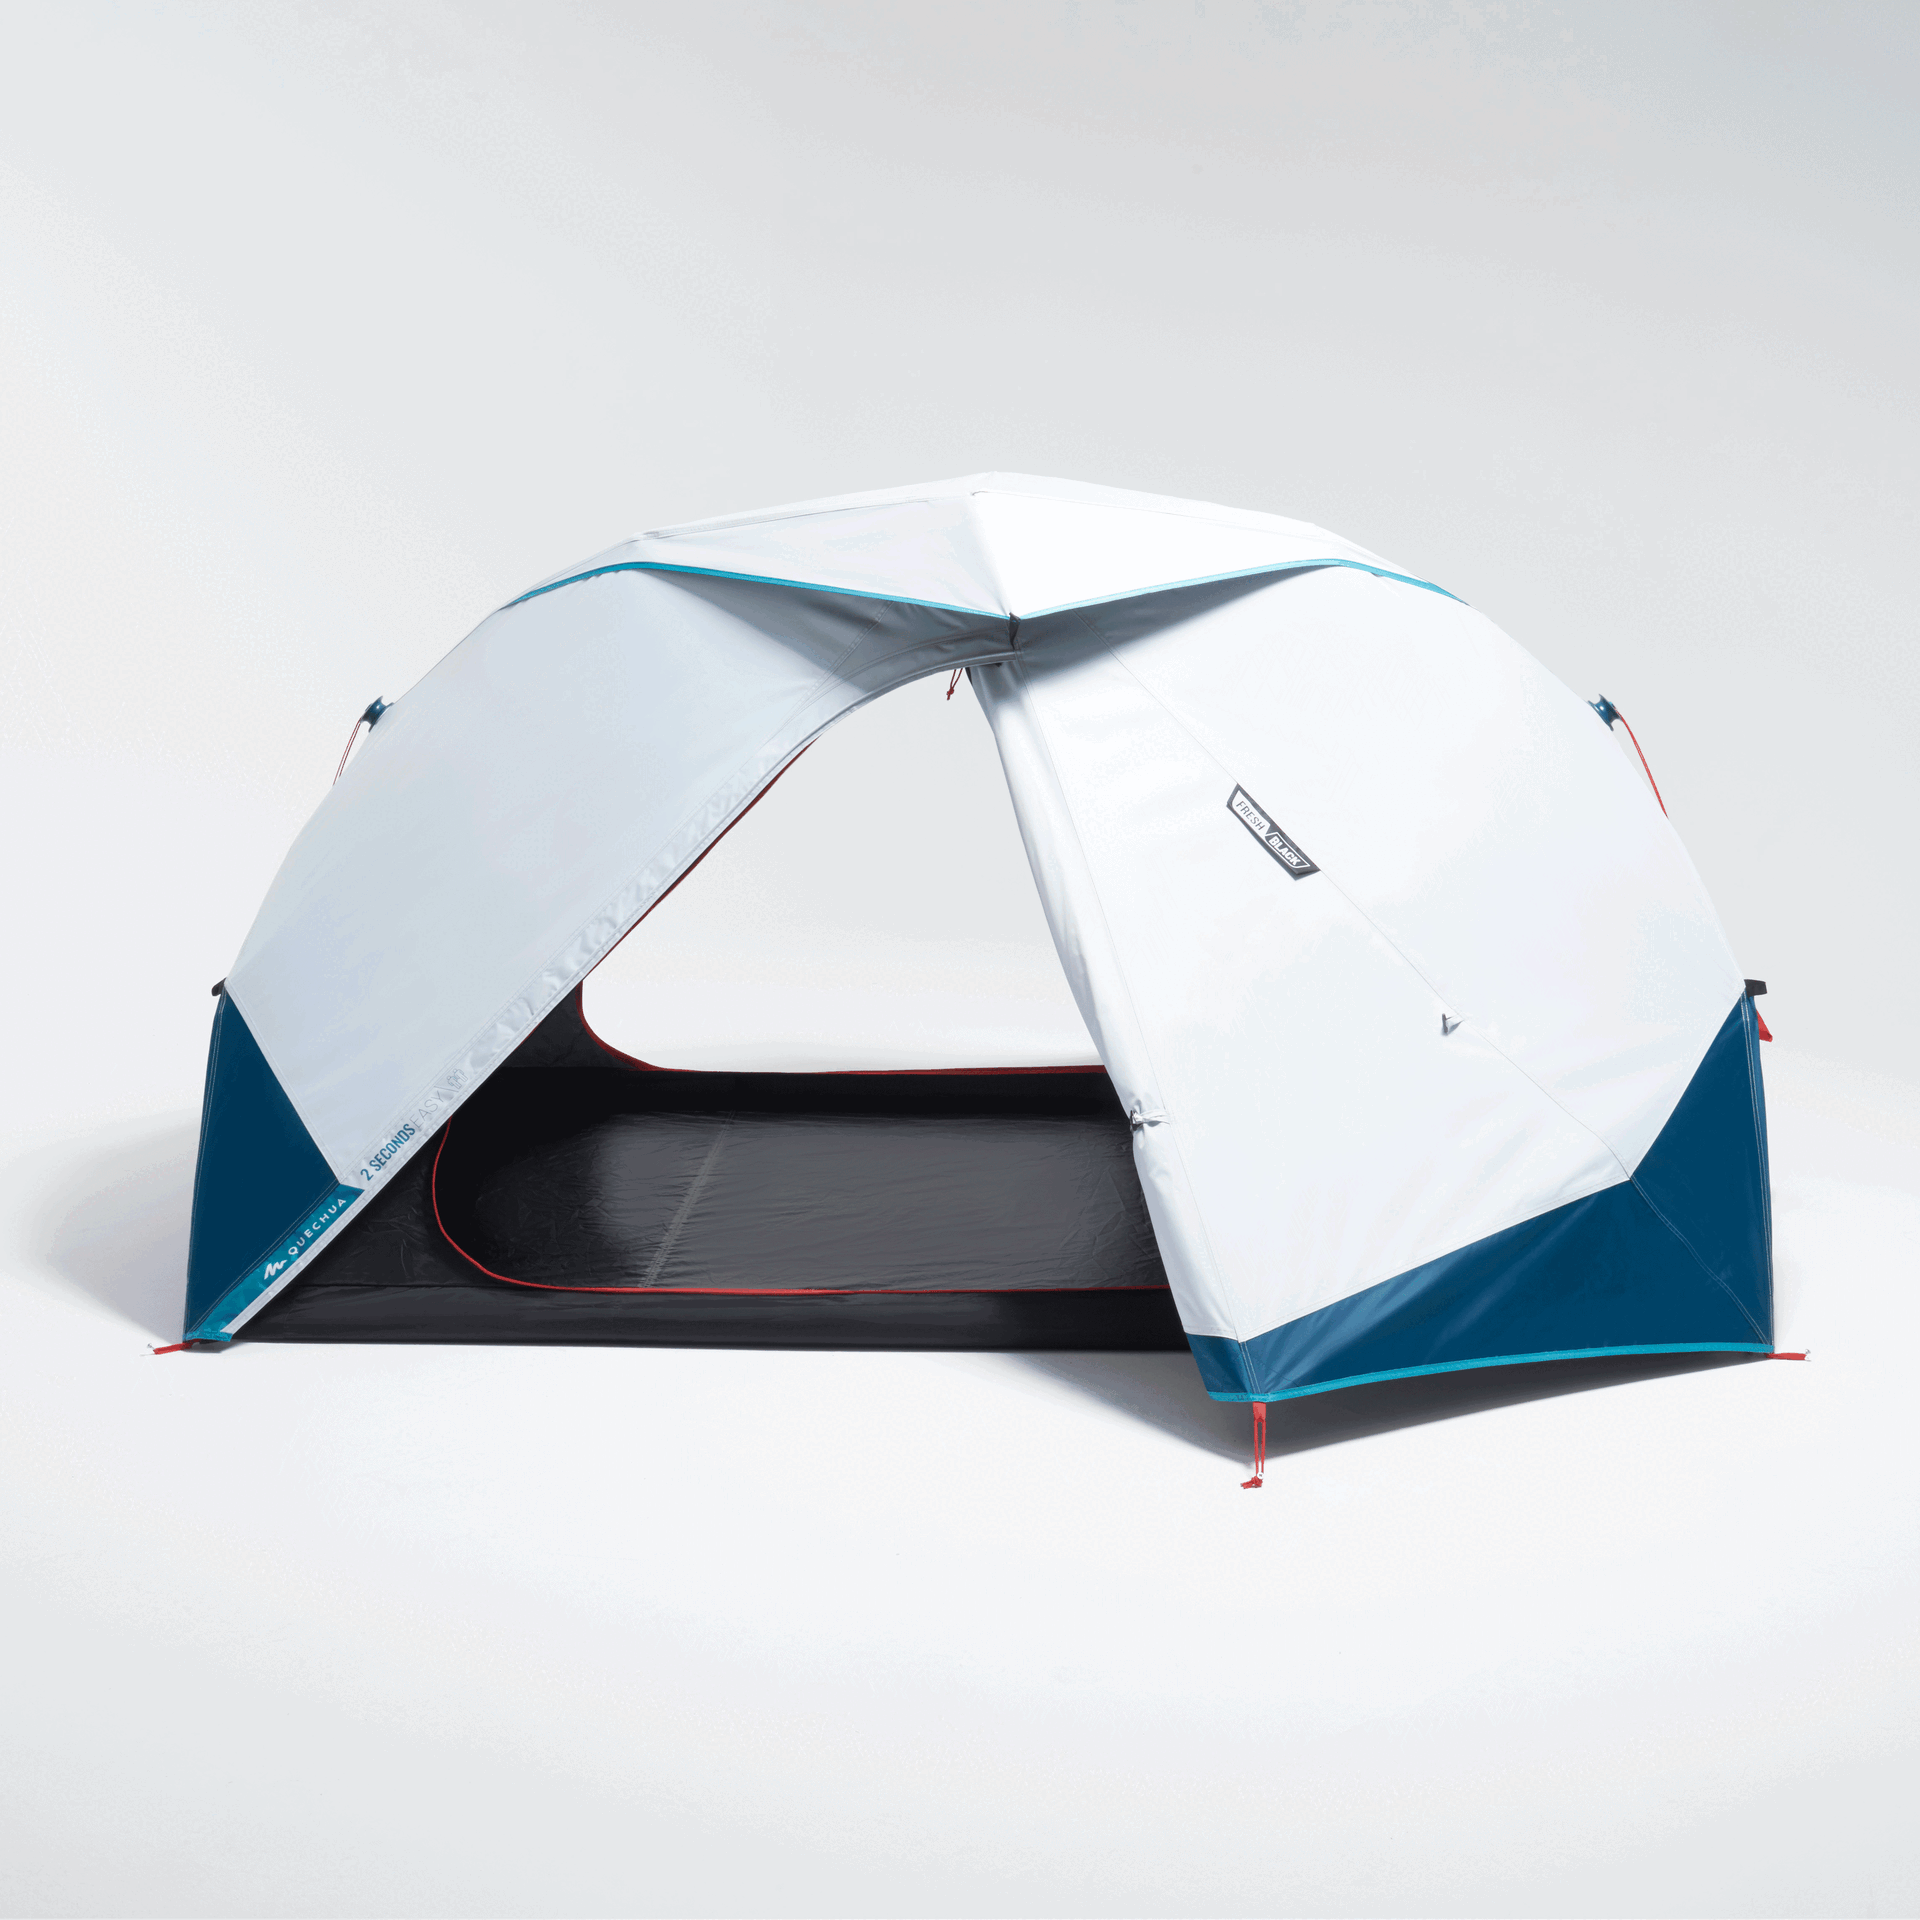 FAMILY TUNNEL TENT - ARPENAZ 4.1 - 4 PEOPLE | 2018